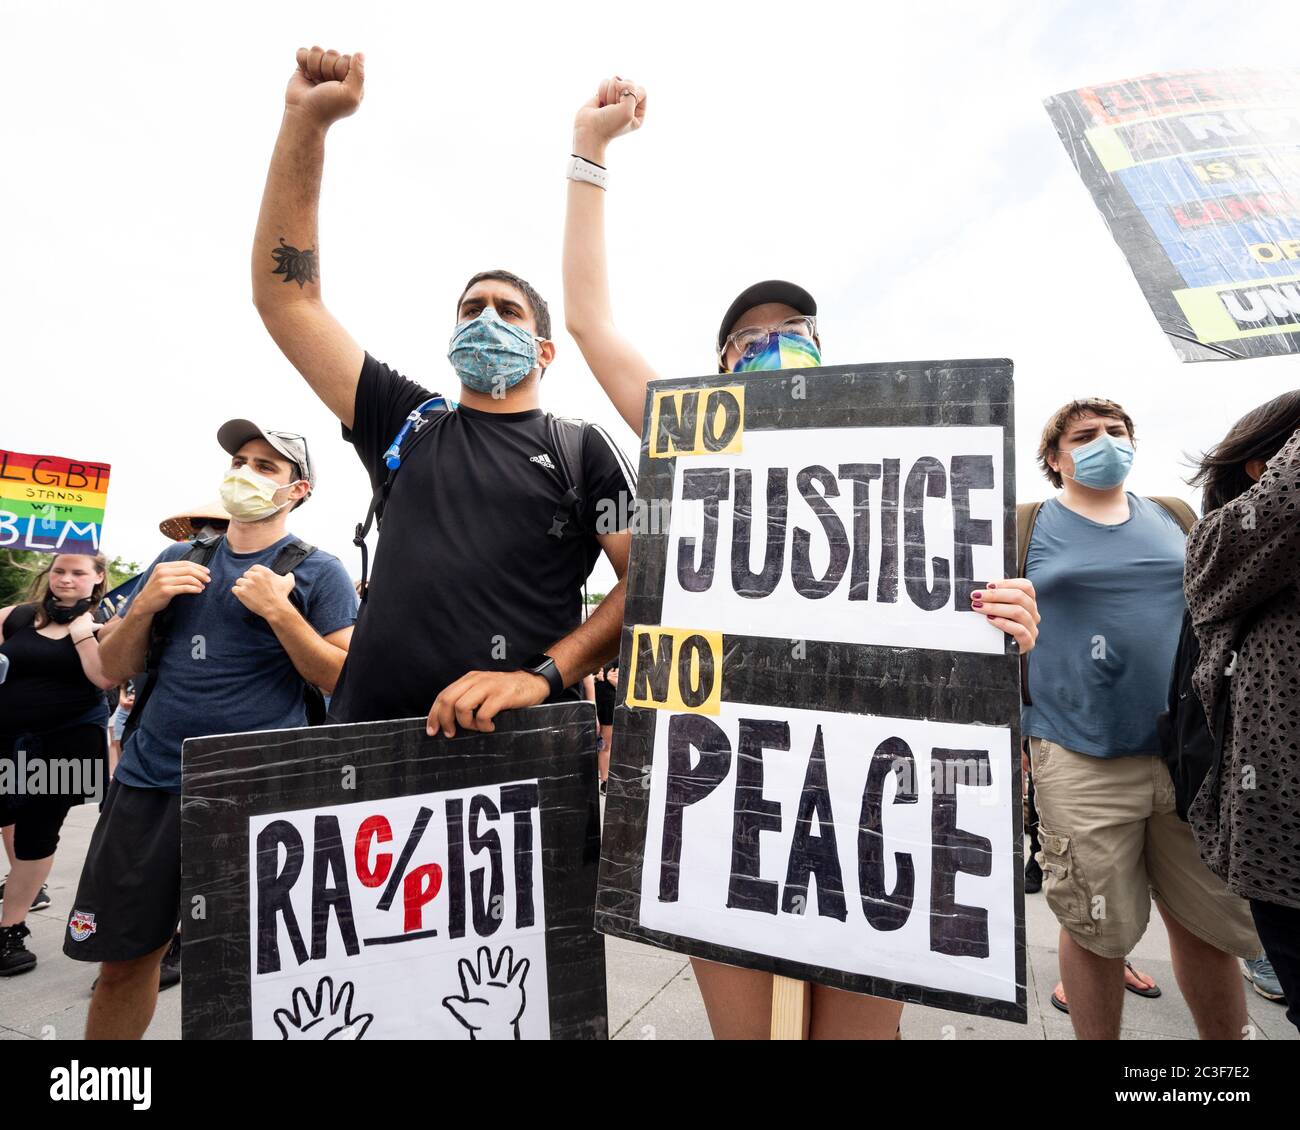 Washington, United States. 19th June, 2020. June 19, 2020 - Washington, DC, United States: Woman with a sign reading 'No Justice No Peace' at a Juneteenth Freedom Day march and rally at the National Mall. (Photo by Michael Brochstein/Sipa USA) Credit: Sipa USA/Alamy Live News Stock Photo